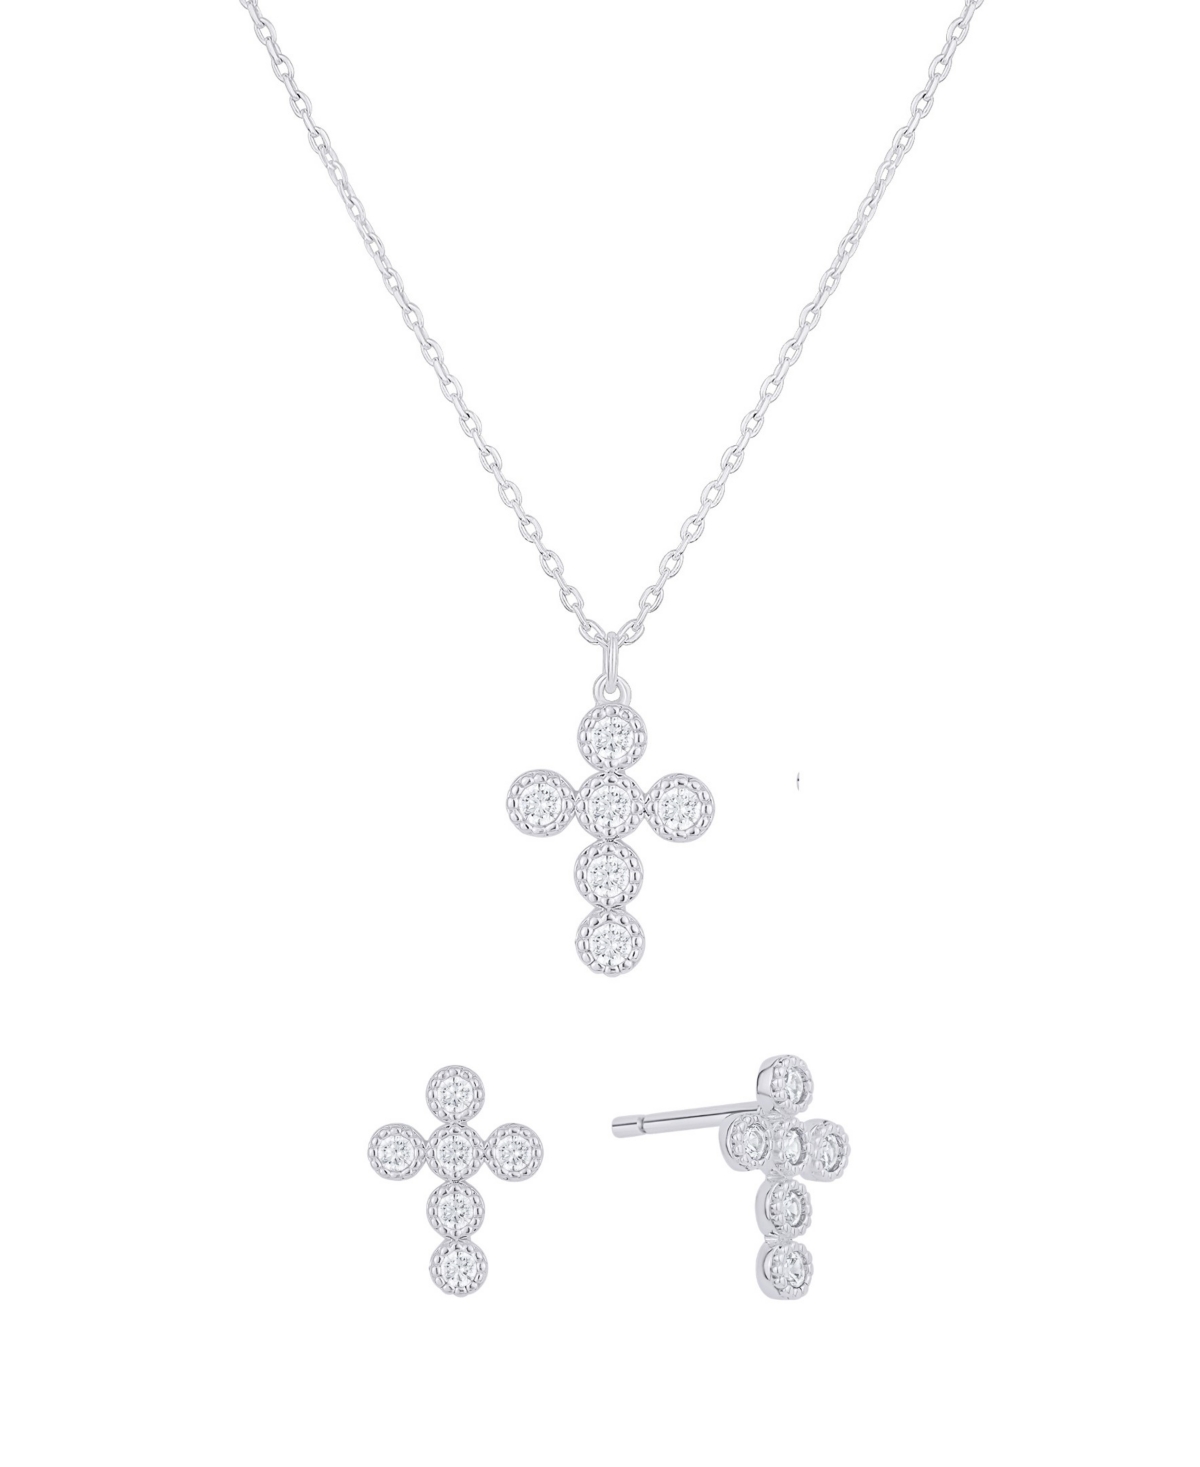 Shop And Now This Cubic Zirconia Cross Stud Earring And Necklace With Jewelry Box Set In Silver